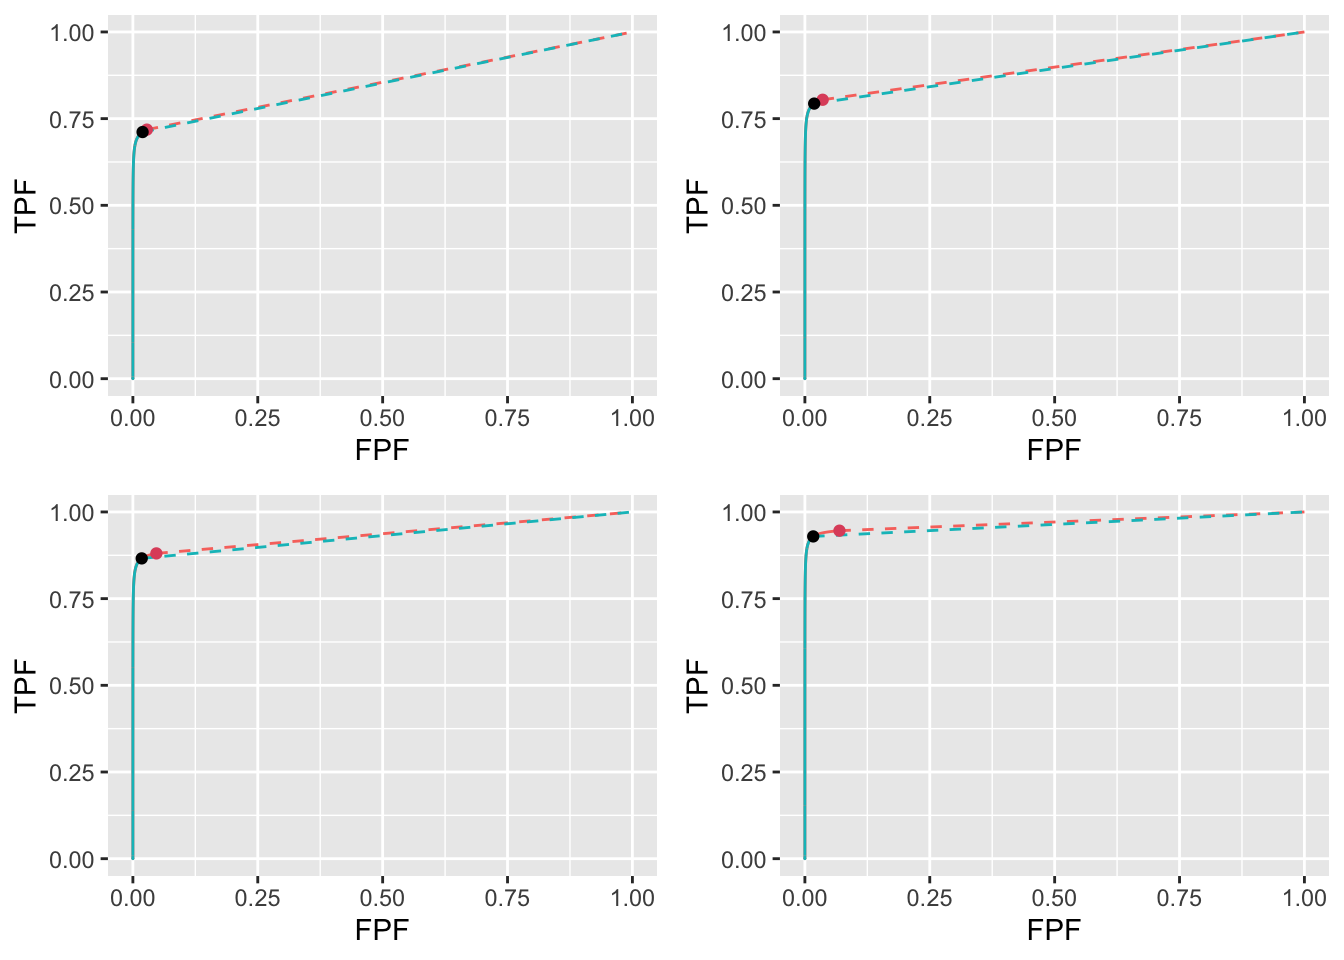 High performance varying $\nu$ ROC plots for the two optimization methods with superimposed operating points. The color coding is as in previous figures. The values of $\nu$ are: top-left $\nu = 0.6$, top-right $\nu = 0.7$, bottom-left $\nu = 0.8$ and bottom-right $\nu = 0.9$.